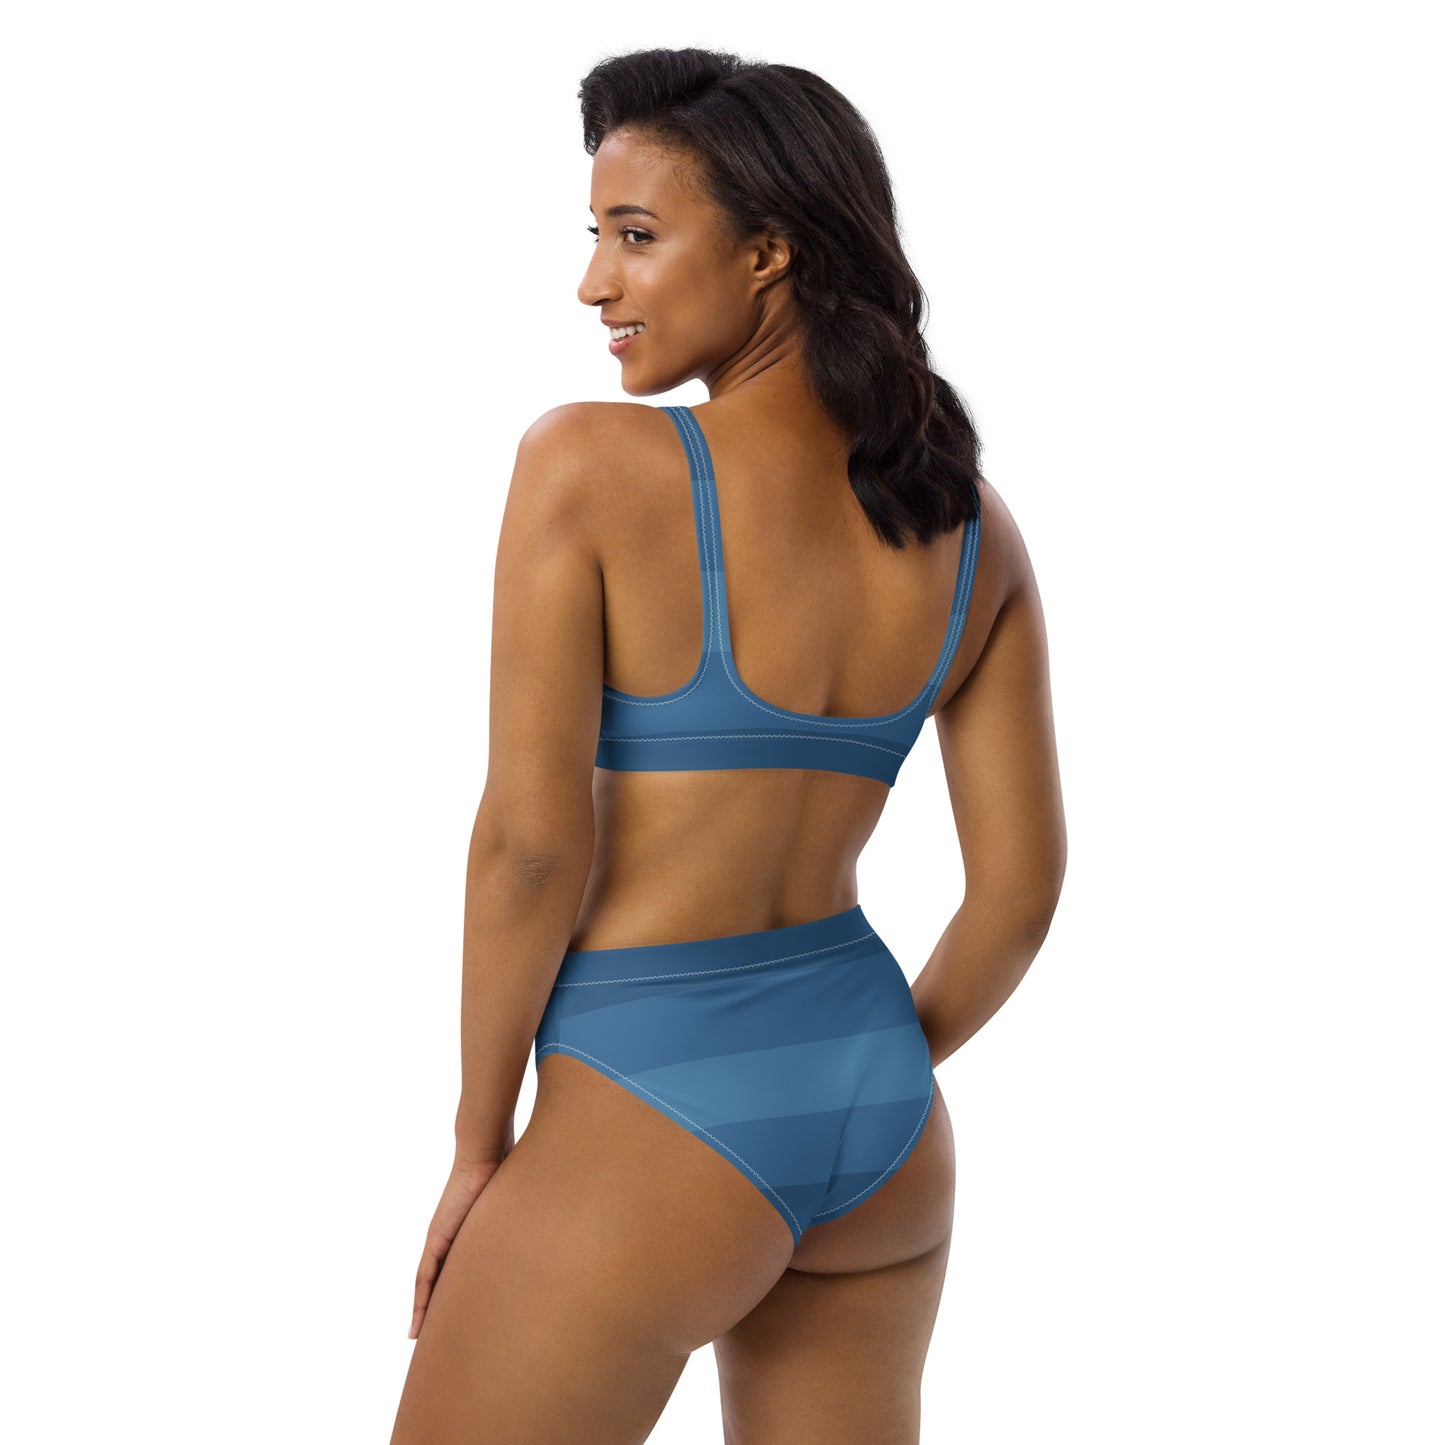 Gradient Blue - Sustainably Made Recycled High-Waisted Bikini